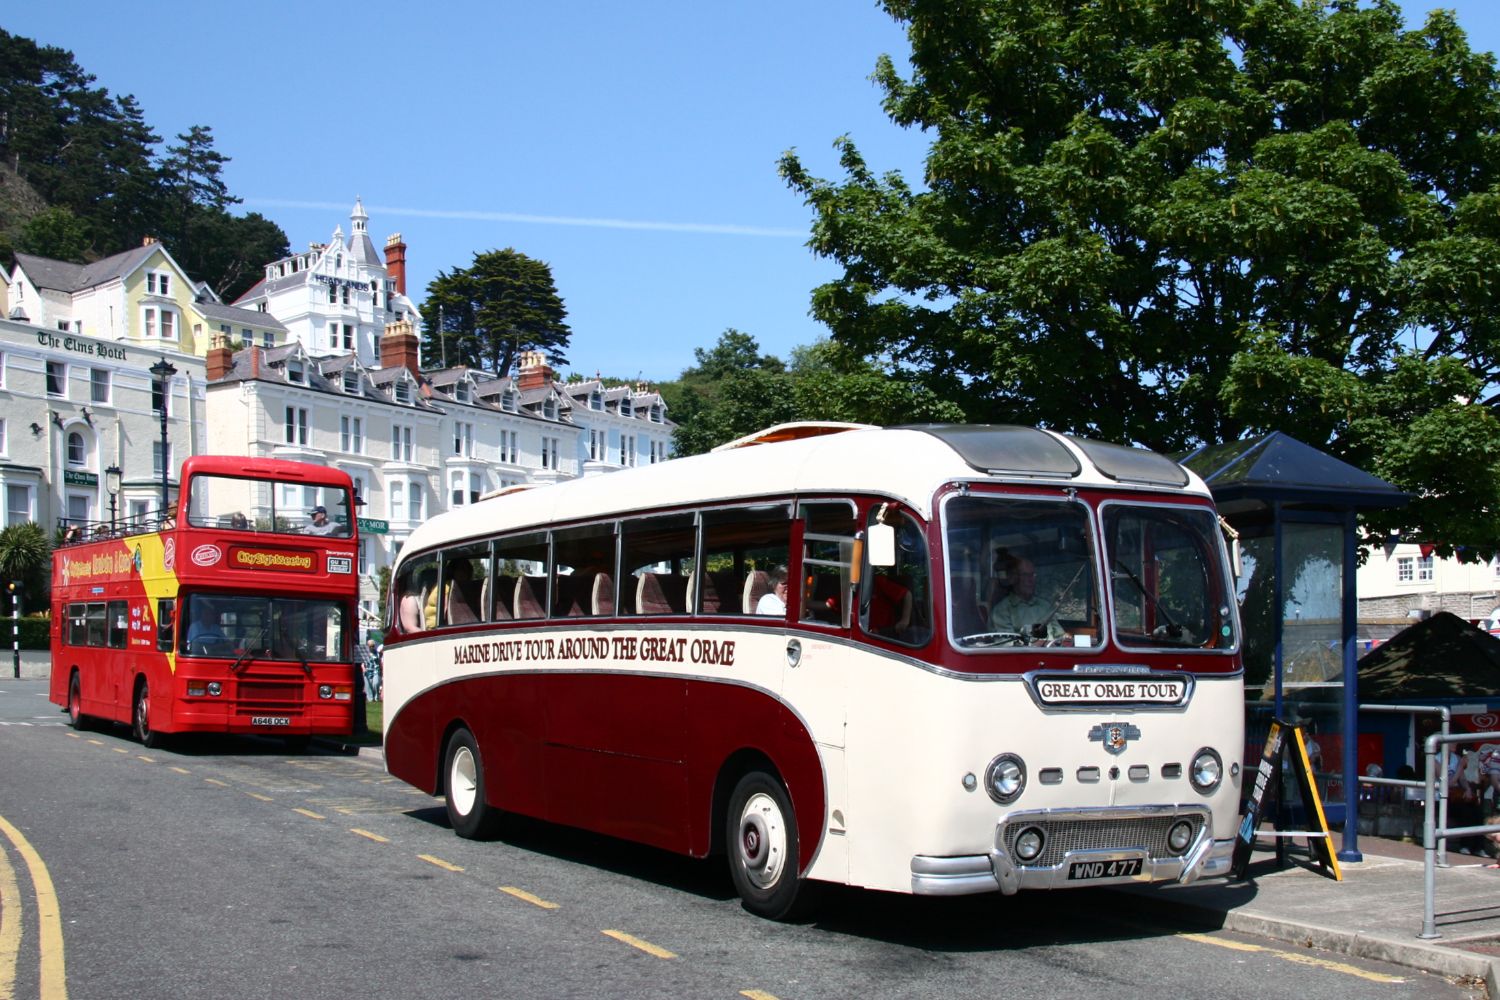 The Duple Britannia at the Pier with an earlier generation of open-top bus behind